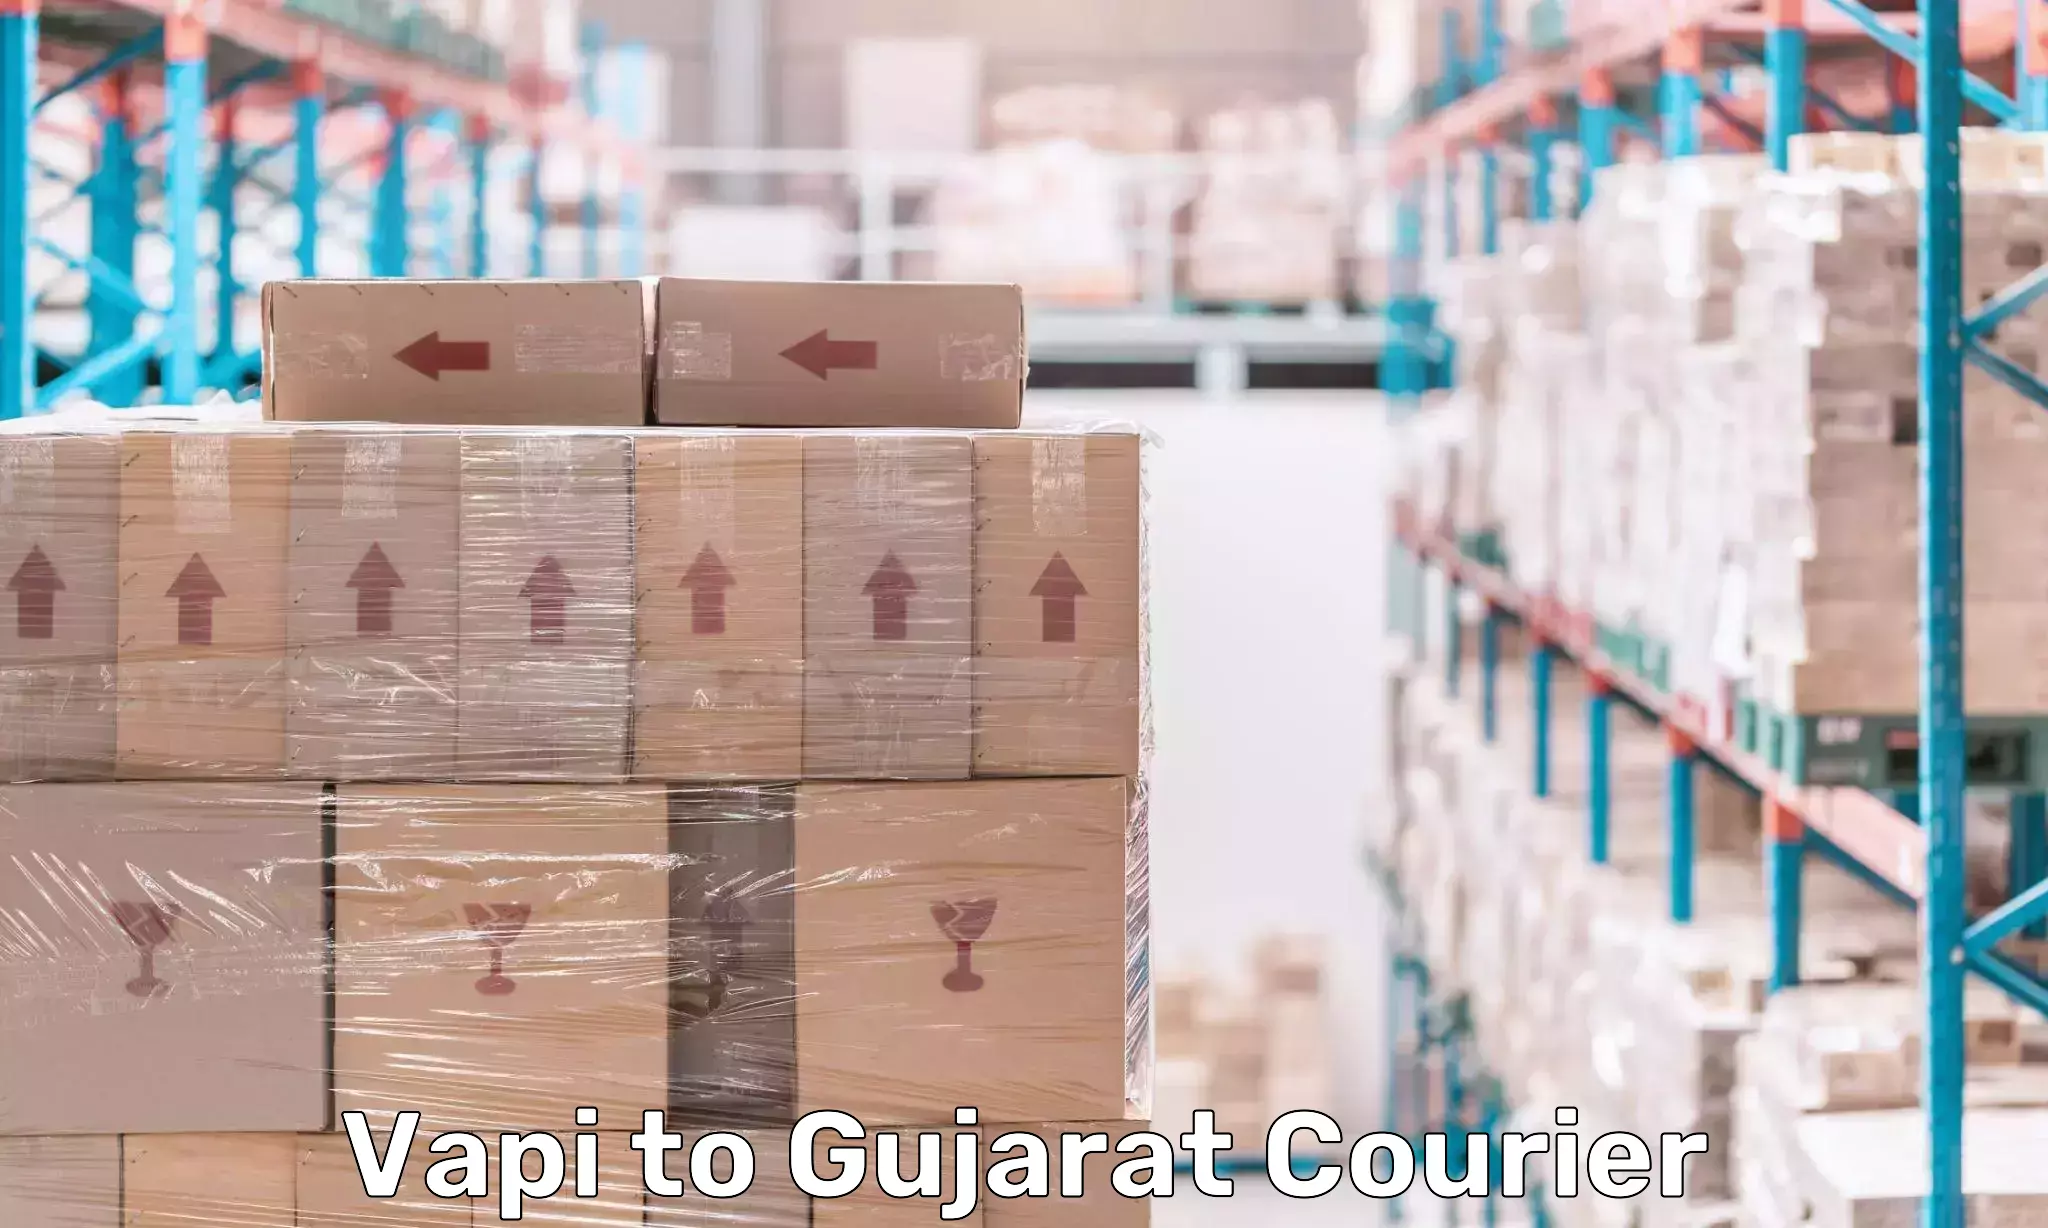 State-of-the-art courier technology Vapi to Nadiad